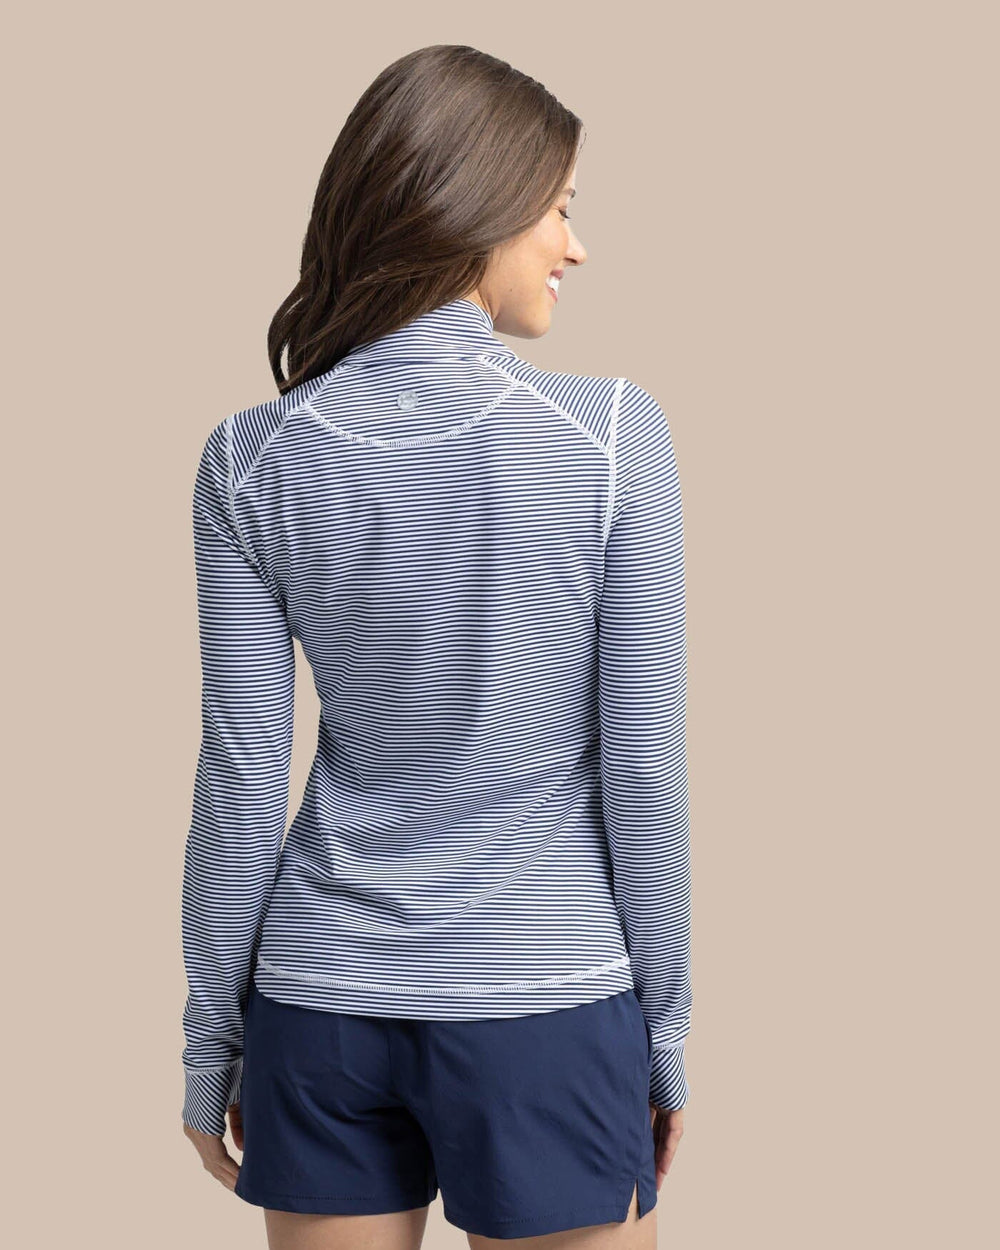 The back view of the Southern Tide Team Colors Runaround Quarter Zip Pull Over by Southern Tide - Nautical Navy